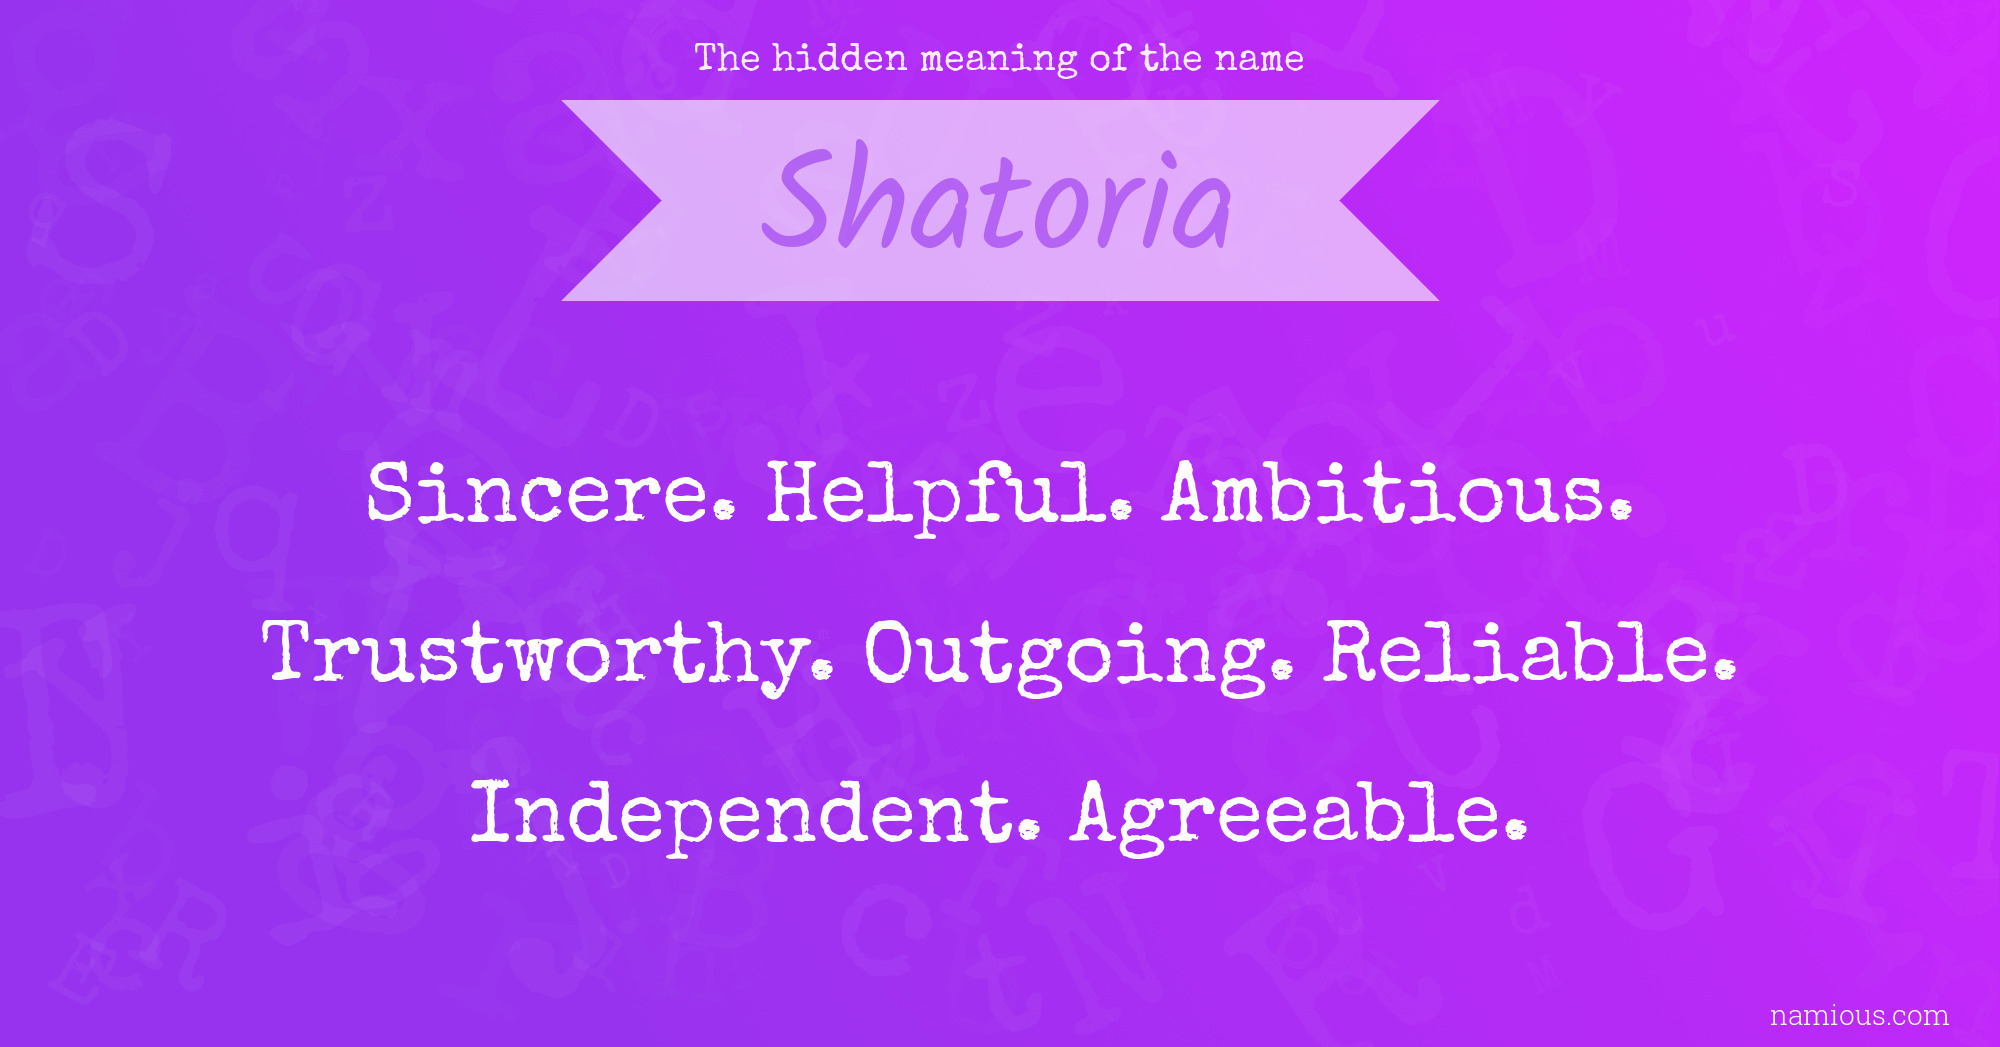 The hidden meaning of the name Shatoria